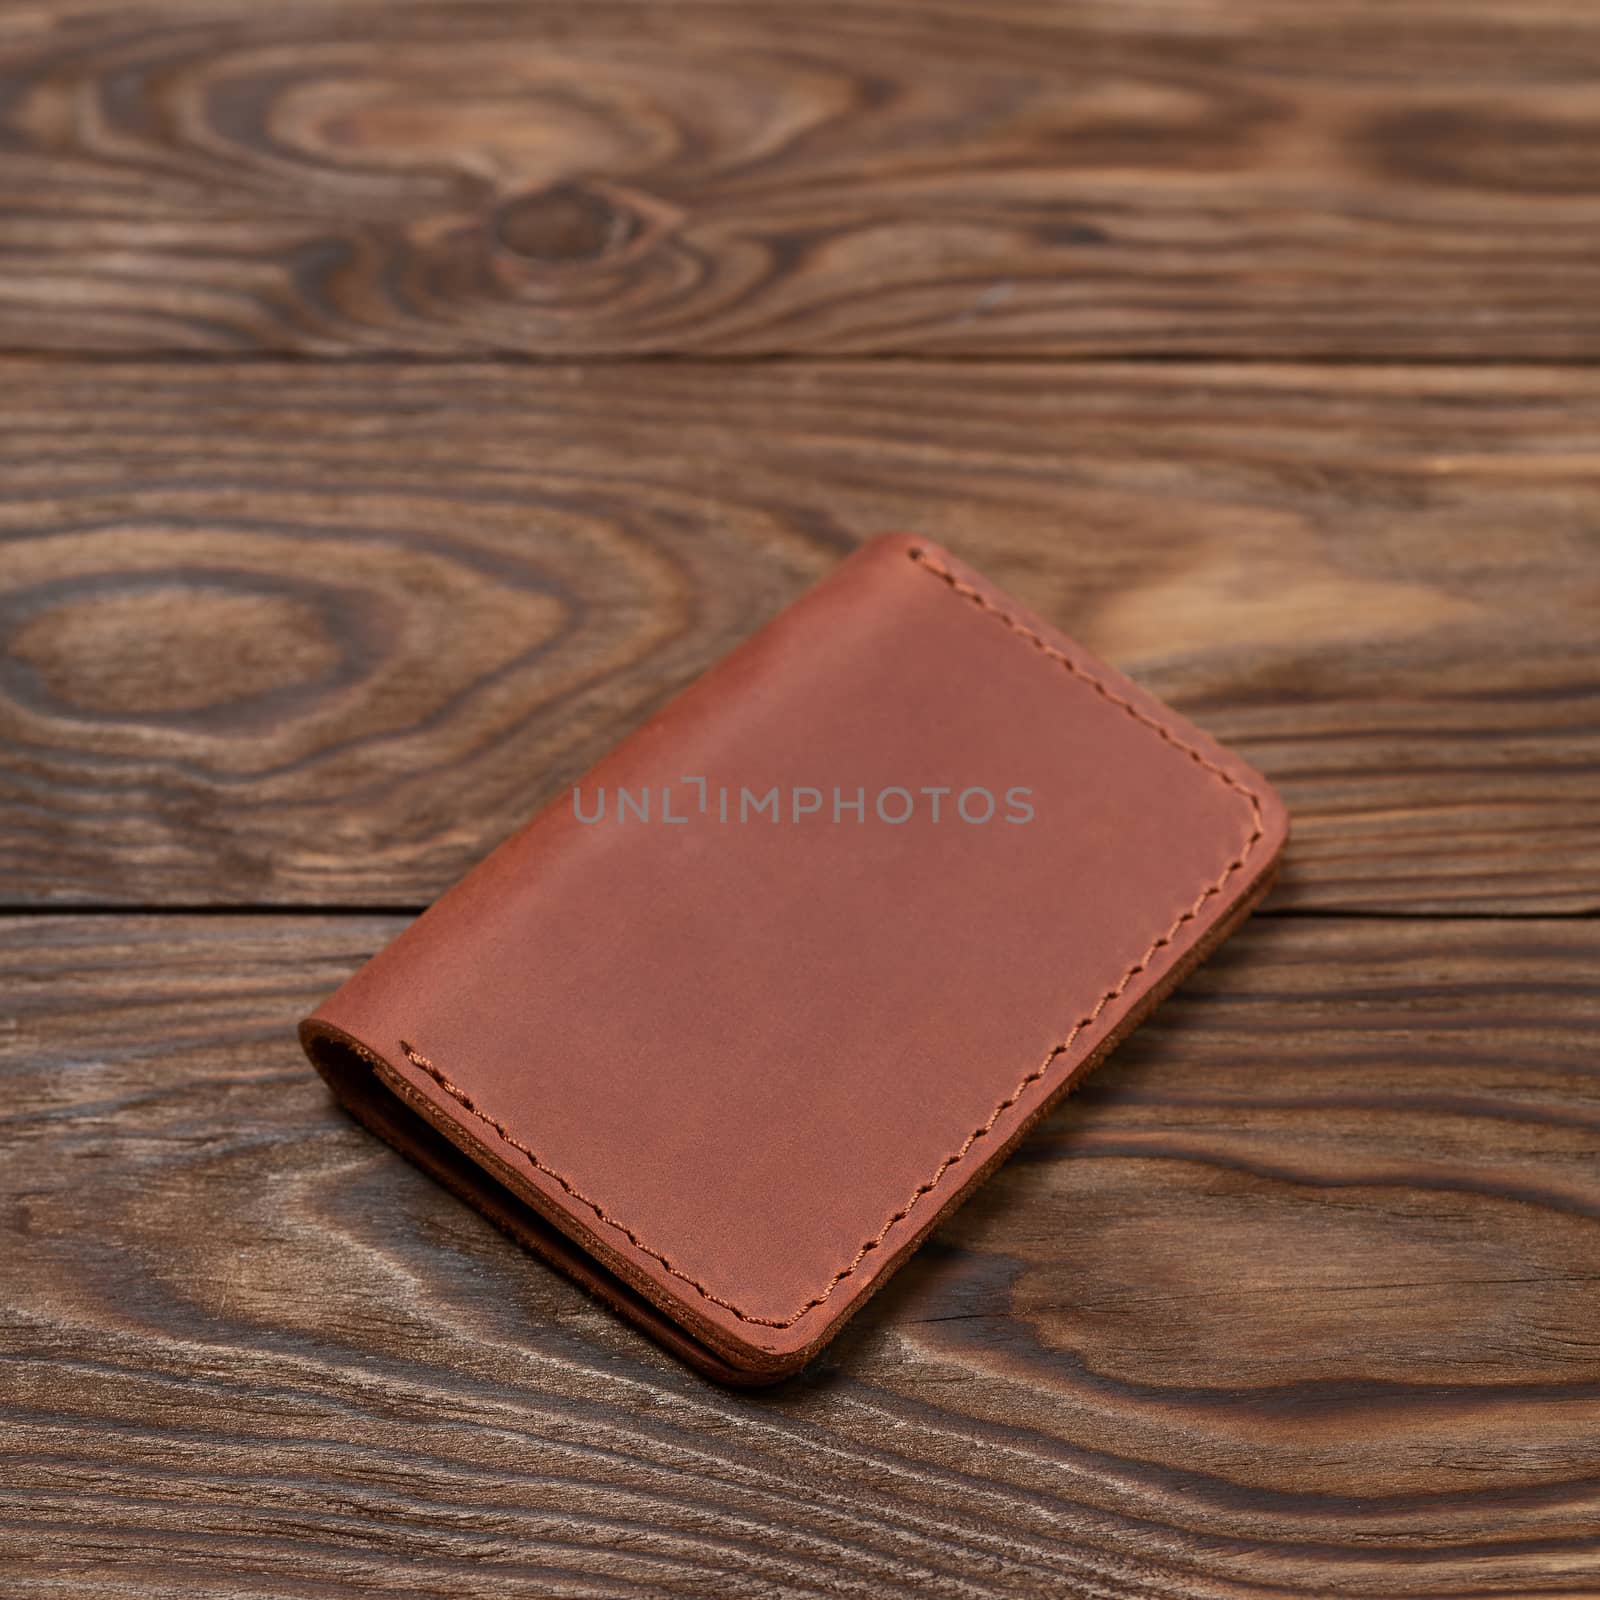 Ginger colour two-pocket closed leather handmade cardholder lies on wooden background. Soft focus on background. Stock photo on blurred background. by alexsdriver